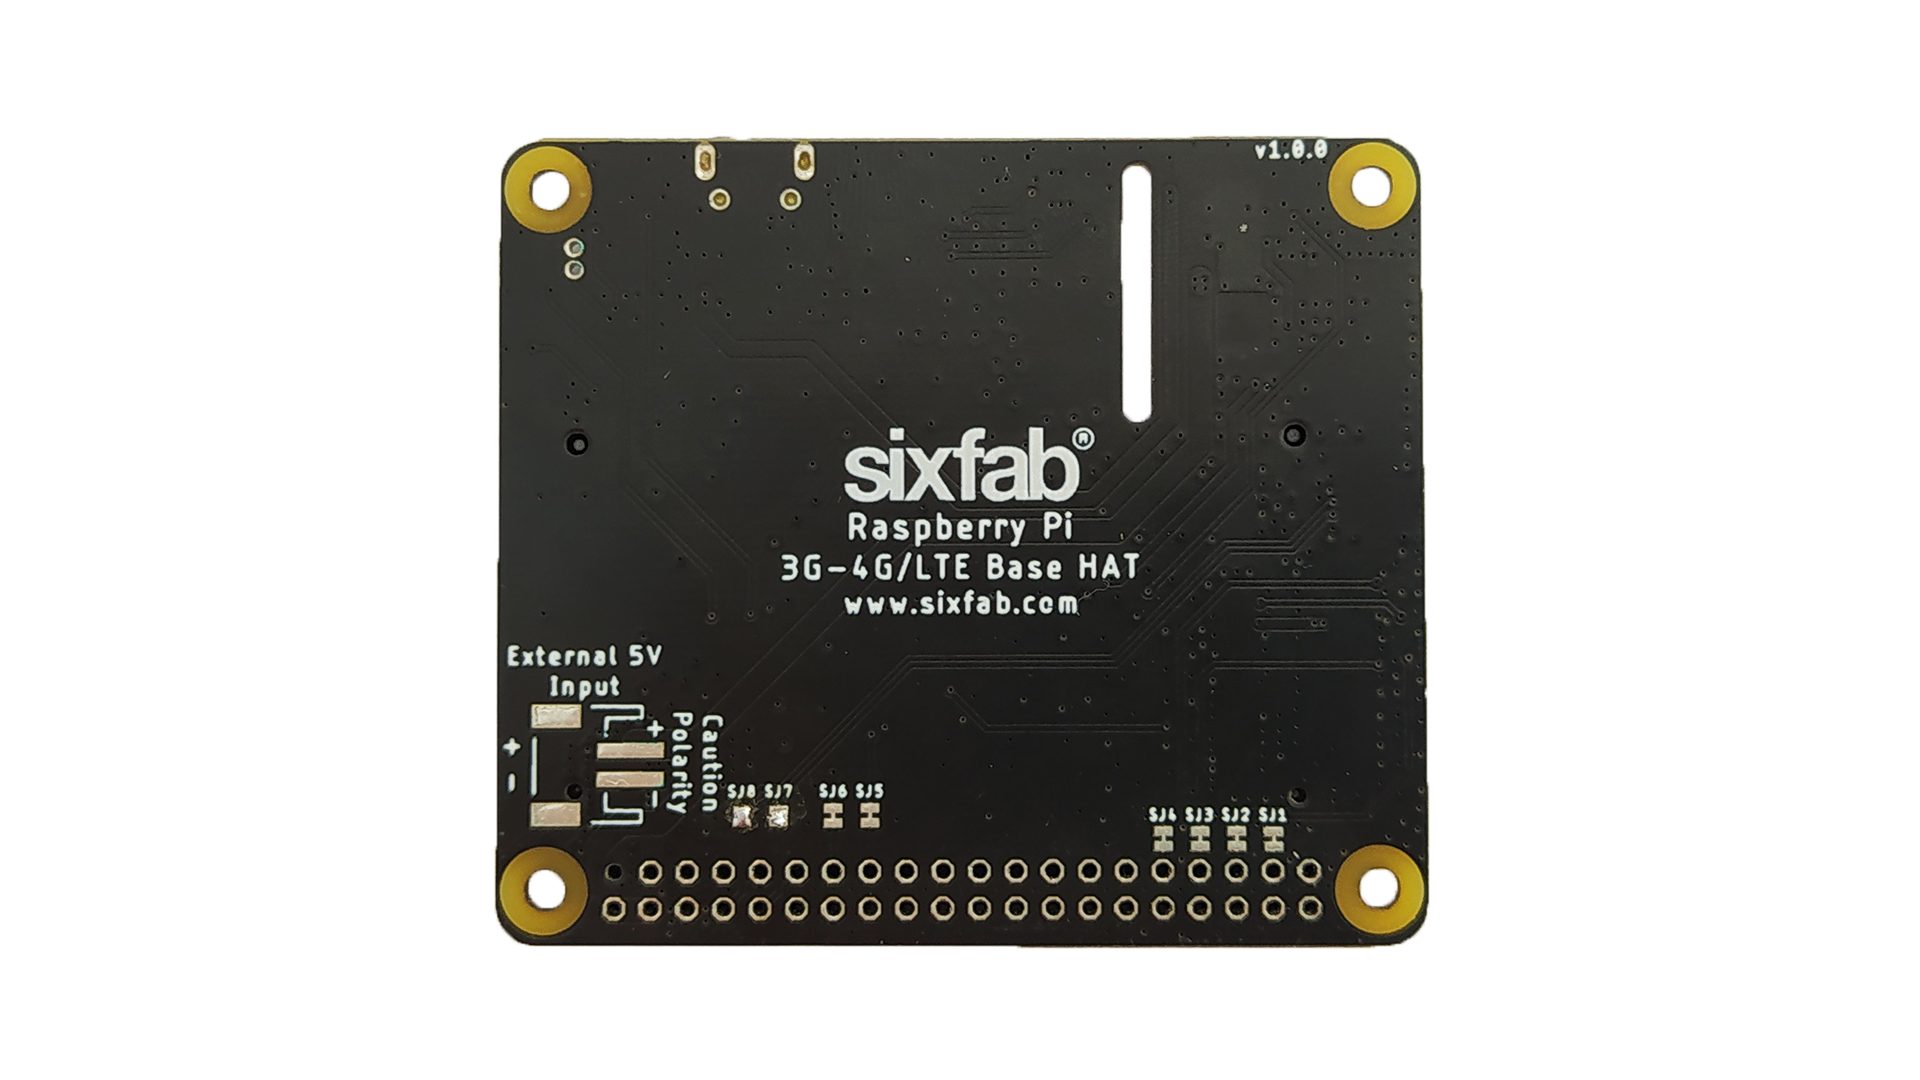 IMAGE OF THE SOLDERED SJ